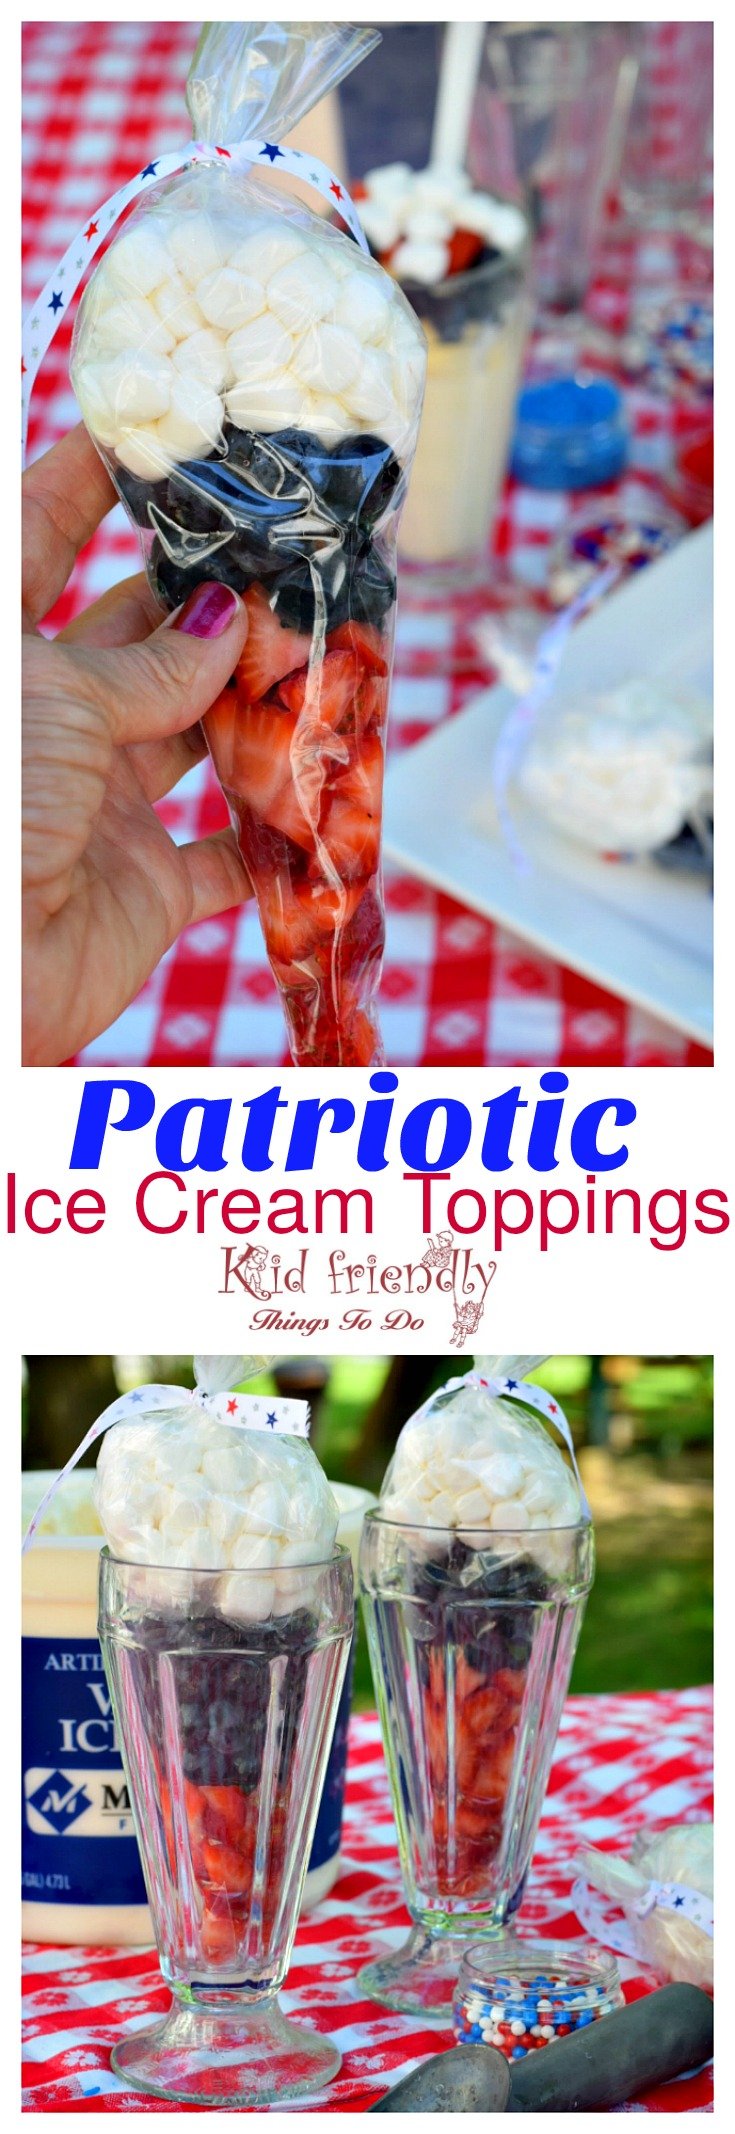 Patriotic Treat Bags Filled with Red, White and Blue Ice Cream Toppings - Patriotic Ice Cream Fun and easy. They like an Ice Cream Cone! summer in a bag. Easy and Fun for ice cream or just a snack recipe! www.kidfriendlythingstodo.com